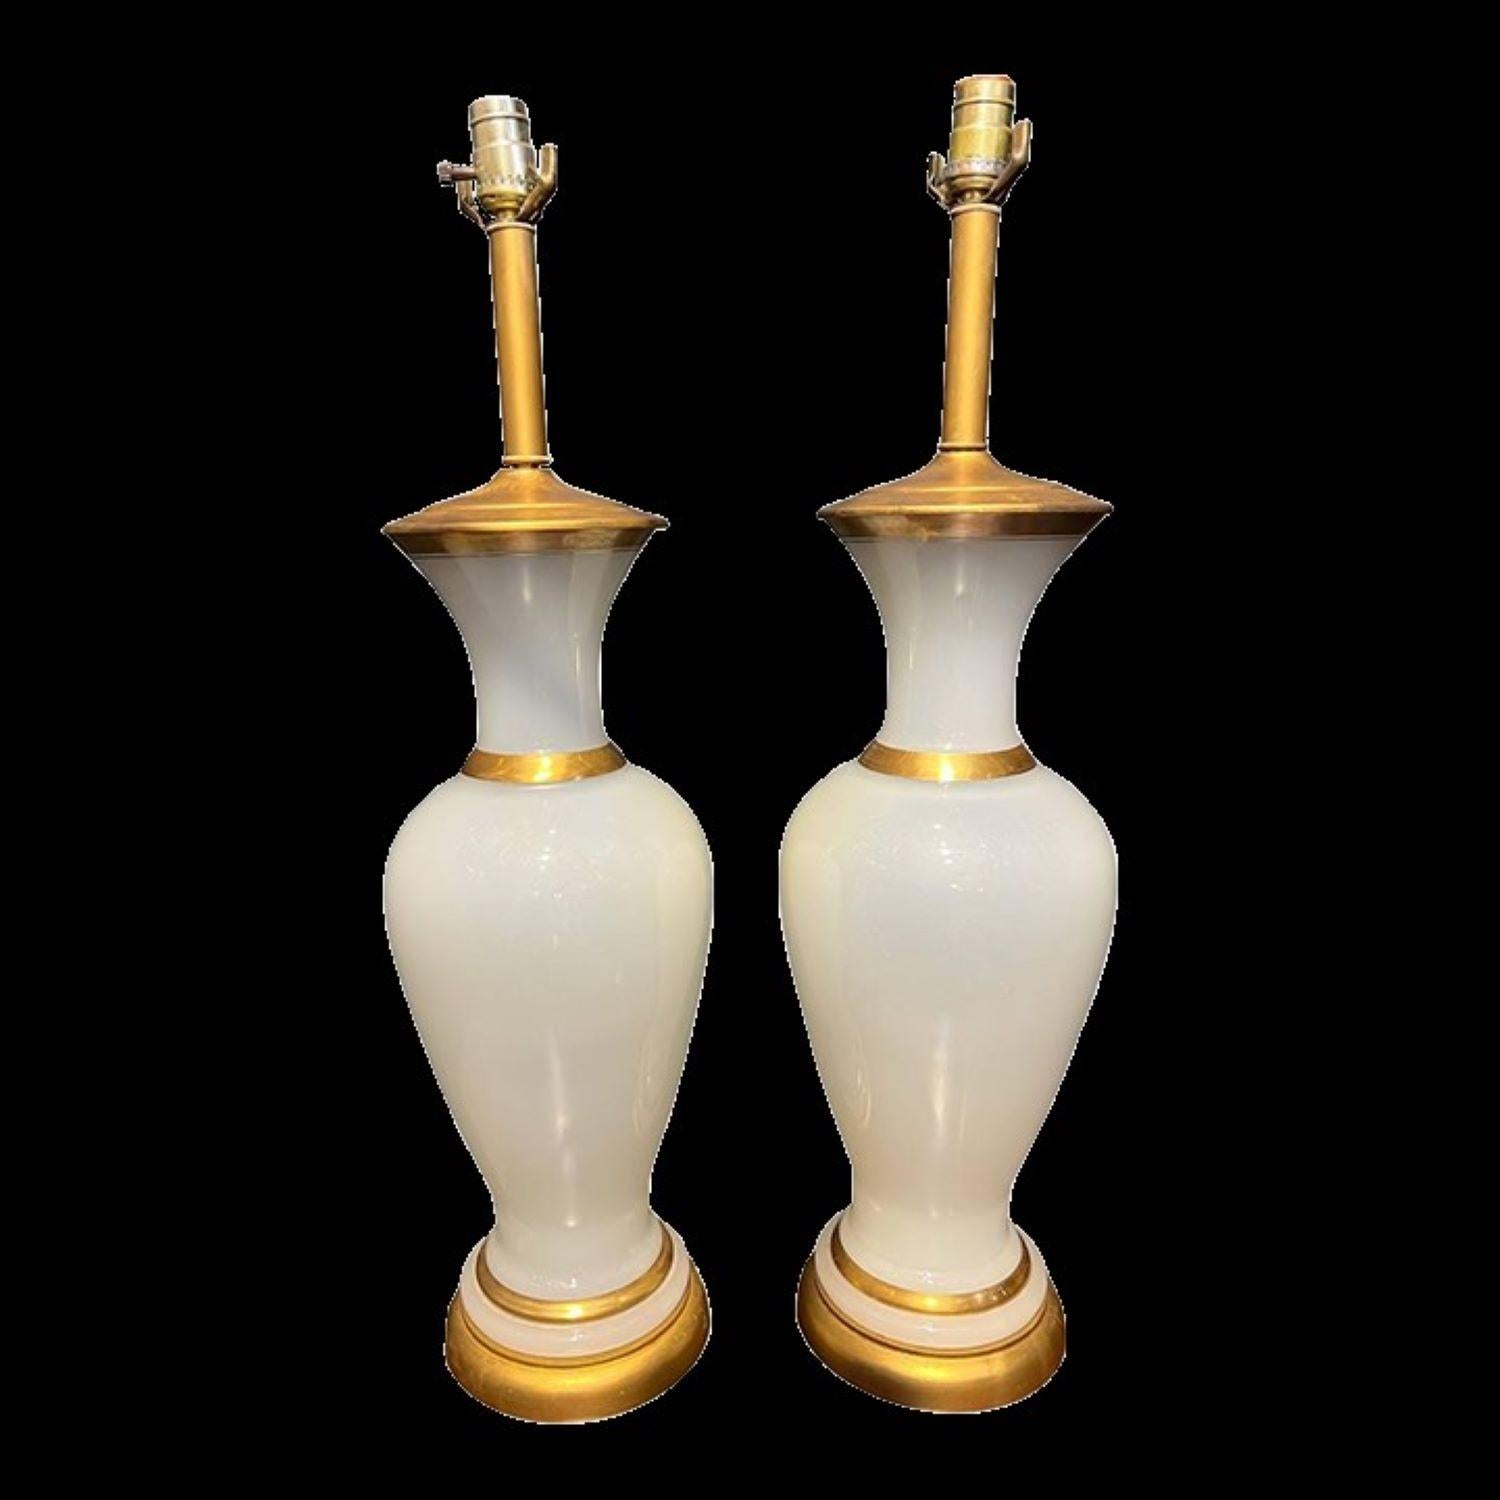 A pair of circa 1940's French Opaline glass table lamps with gilt details.